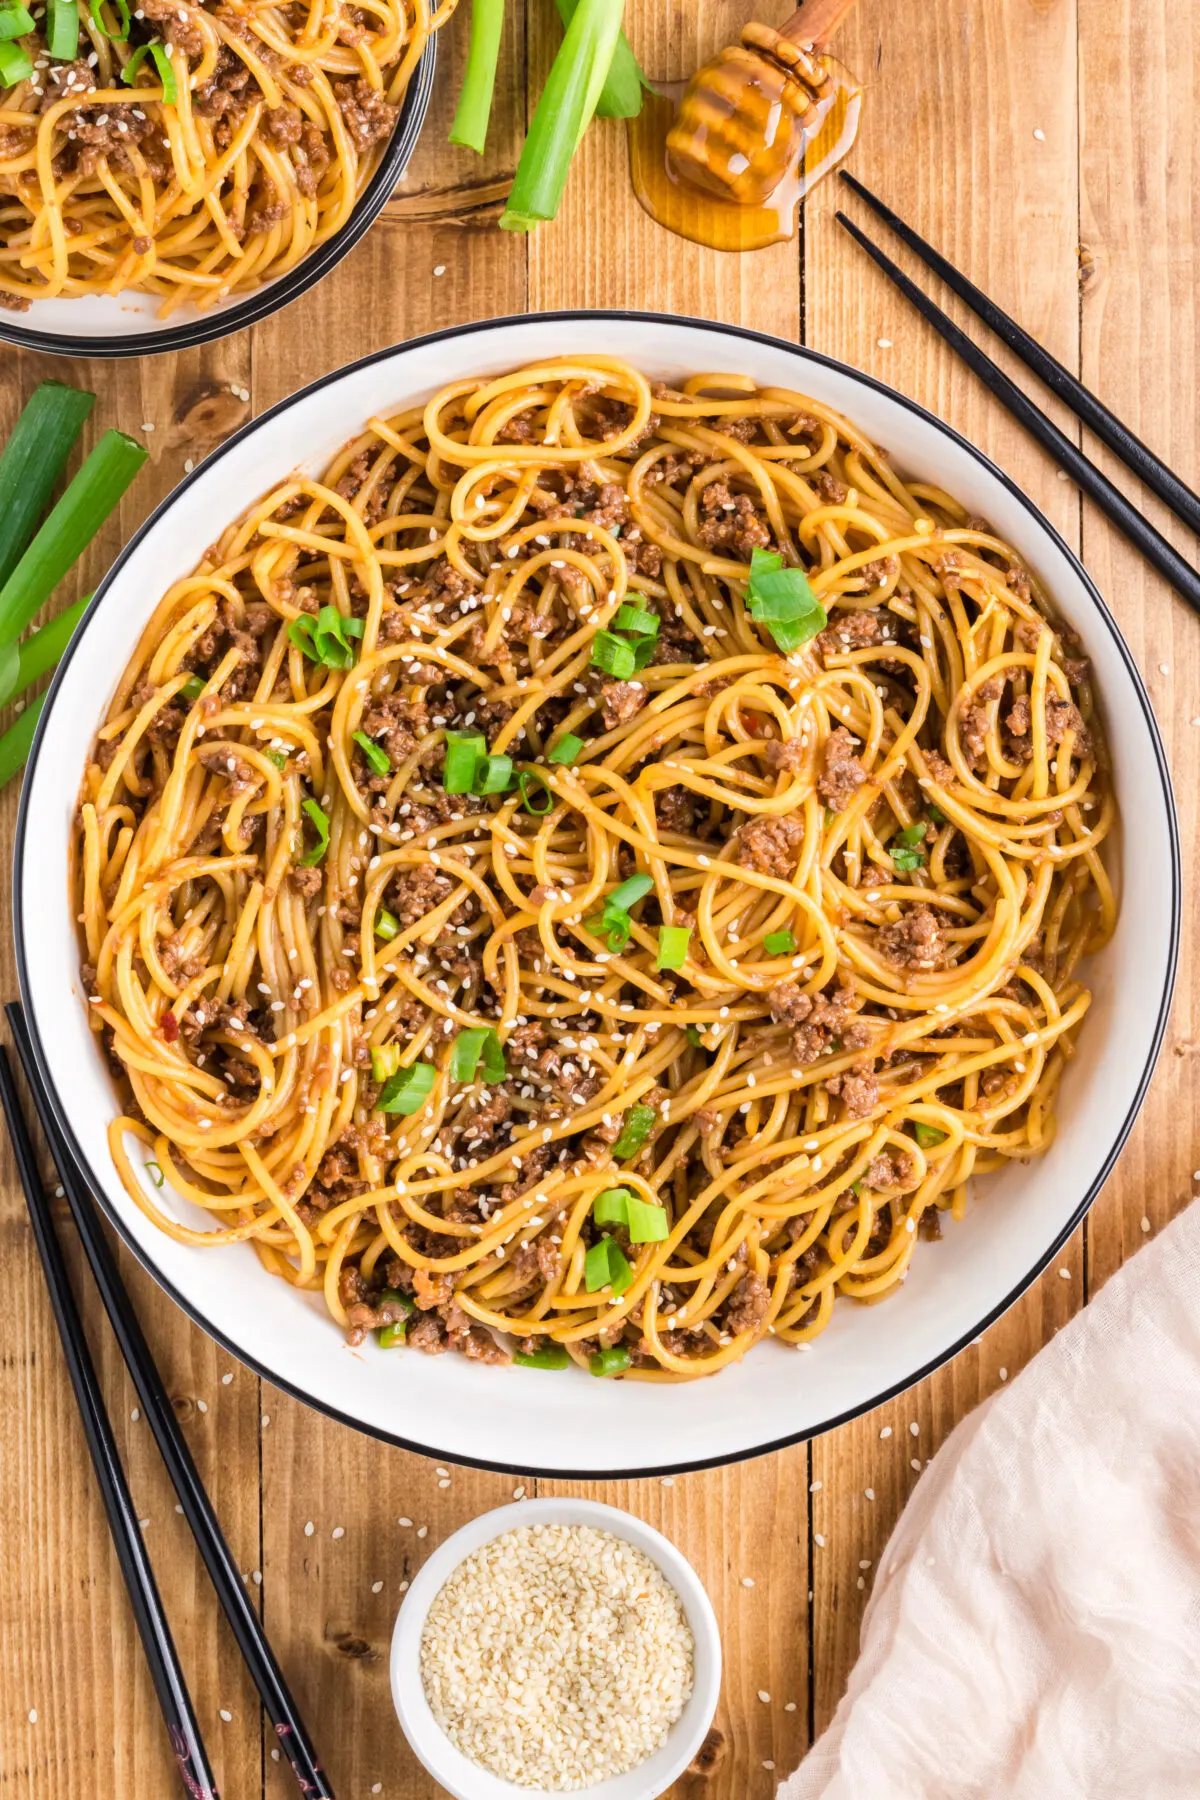 Savour the taste of homemade ground beef Mongolian noodles. Quick, one-pot meal packed with rich Asian flavours ready in just 30 minutes.